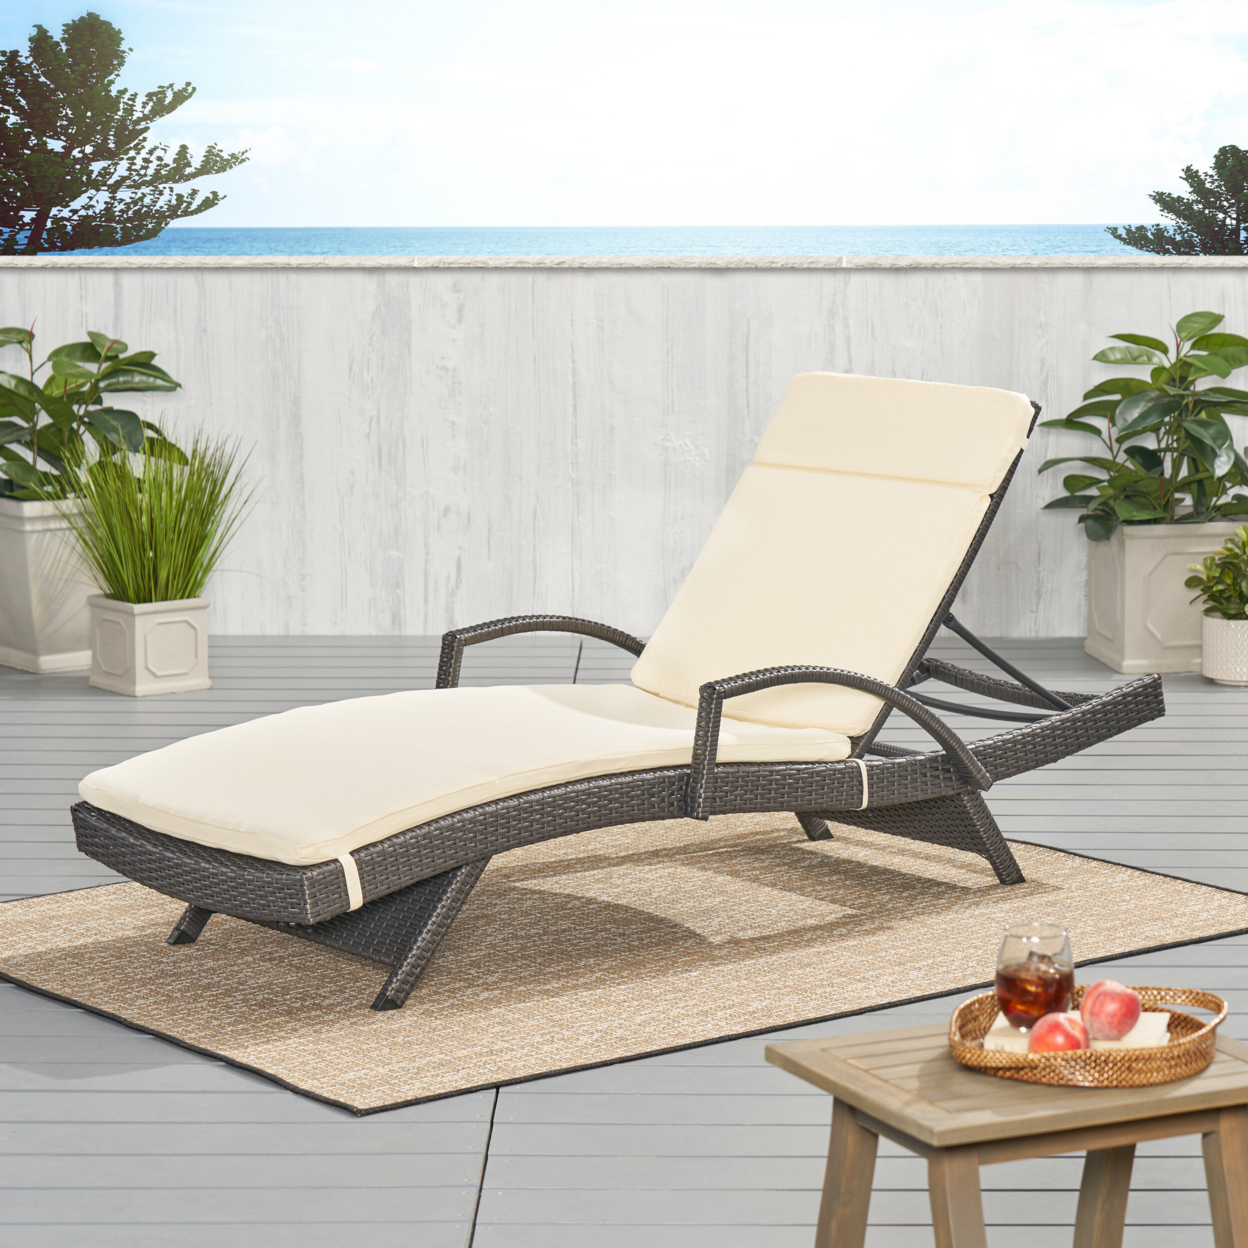 Soleil Outdoor Water Resistant Chaise Lounge Cushion - Caramel